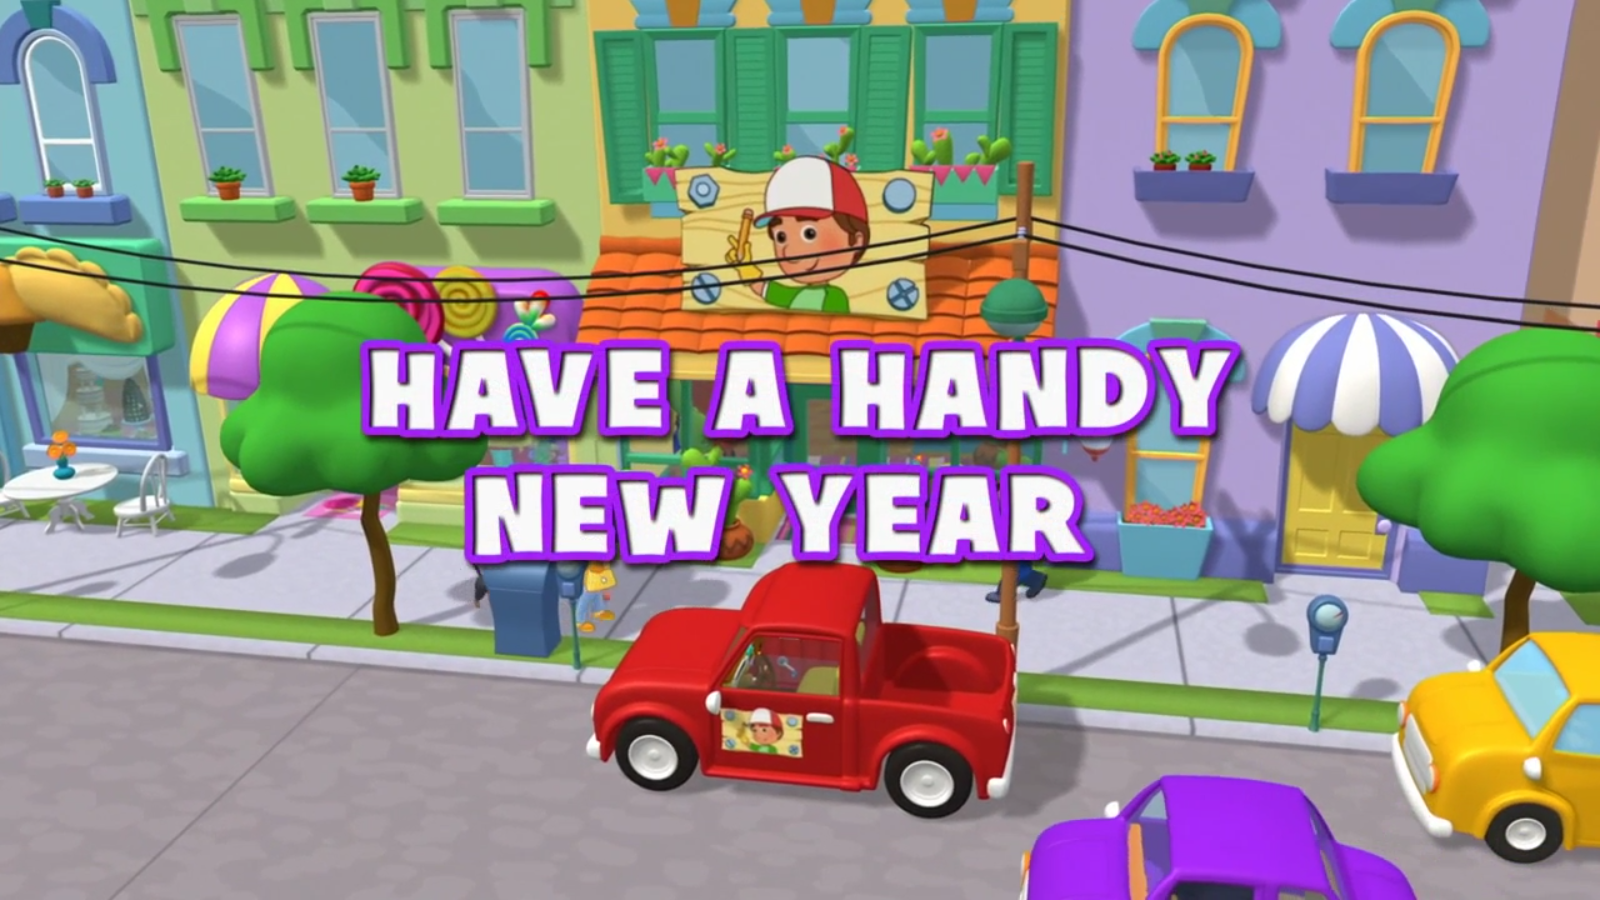 Have a Handy New Year